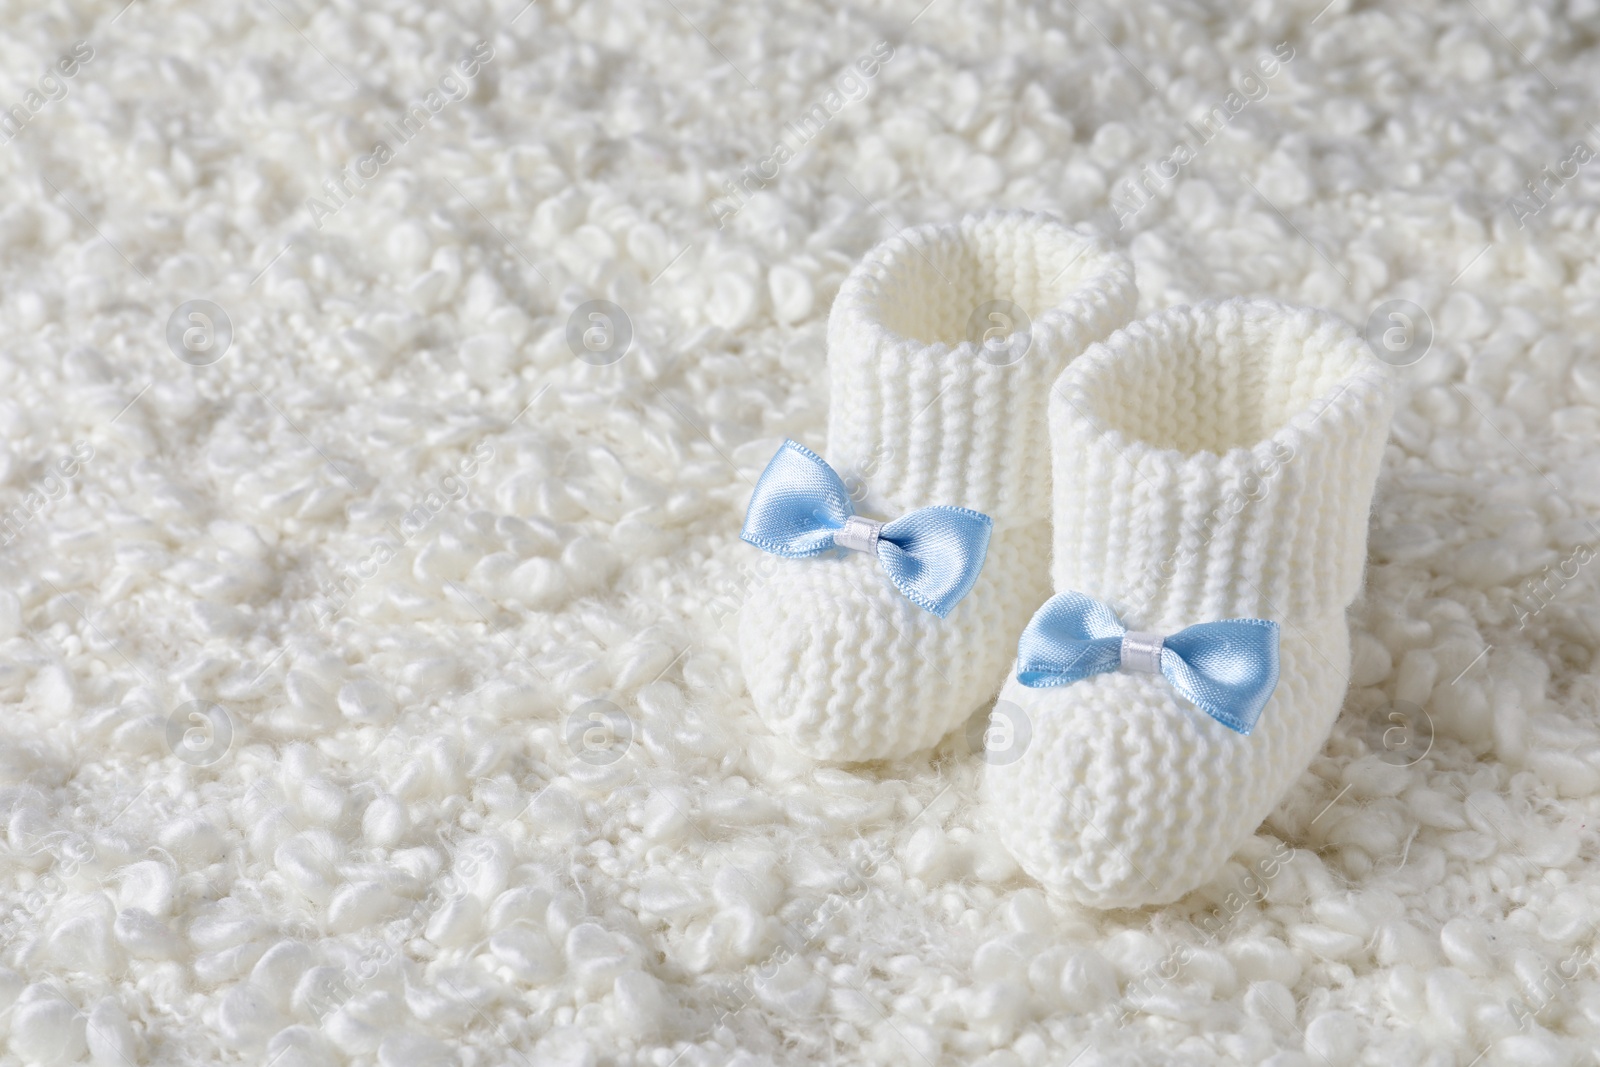 Photo of Handmade baby booties on soft plaid. Space for text